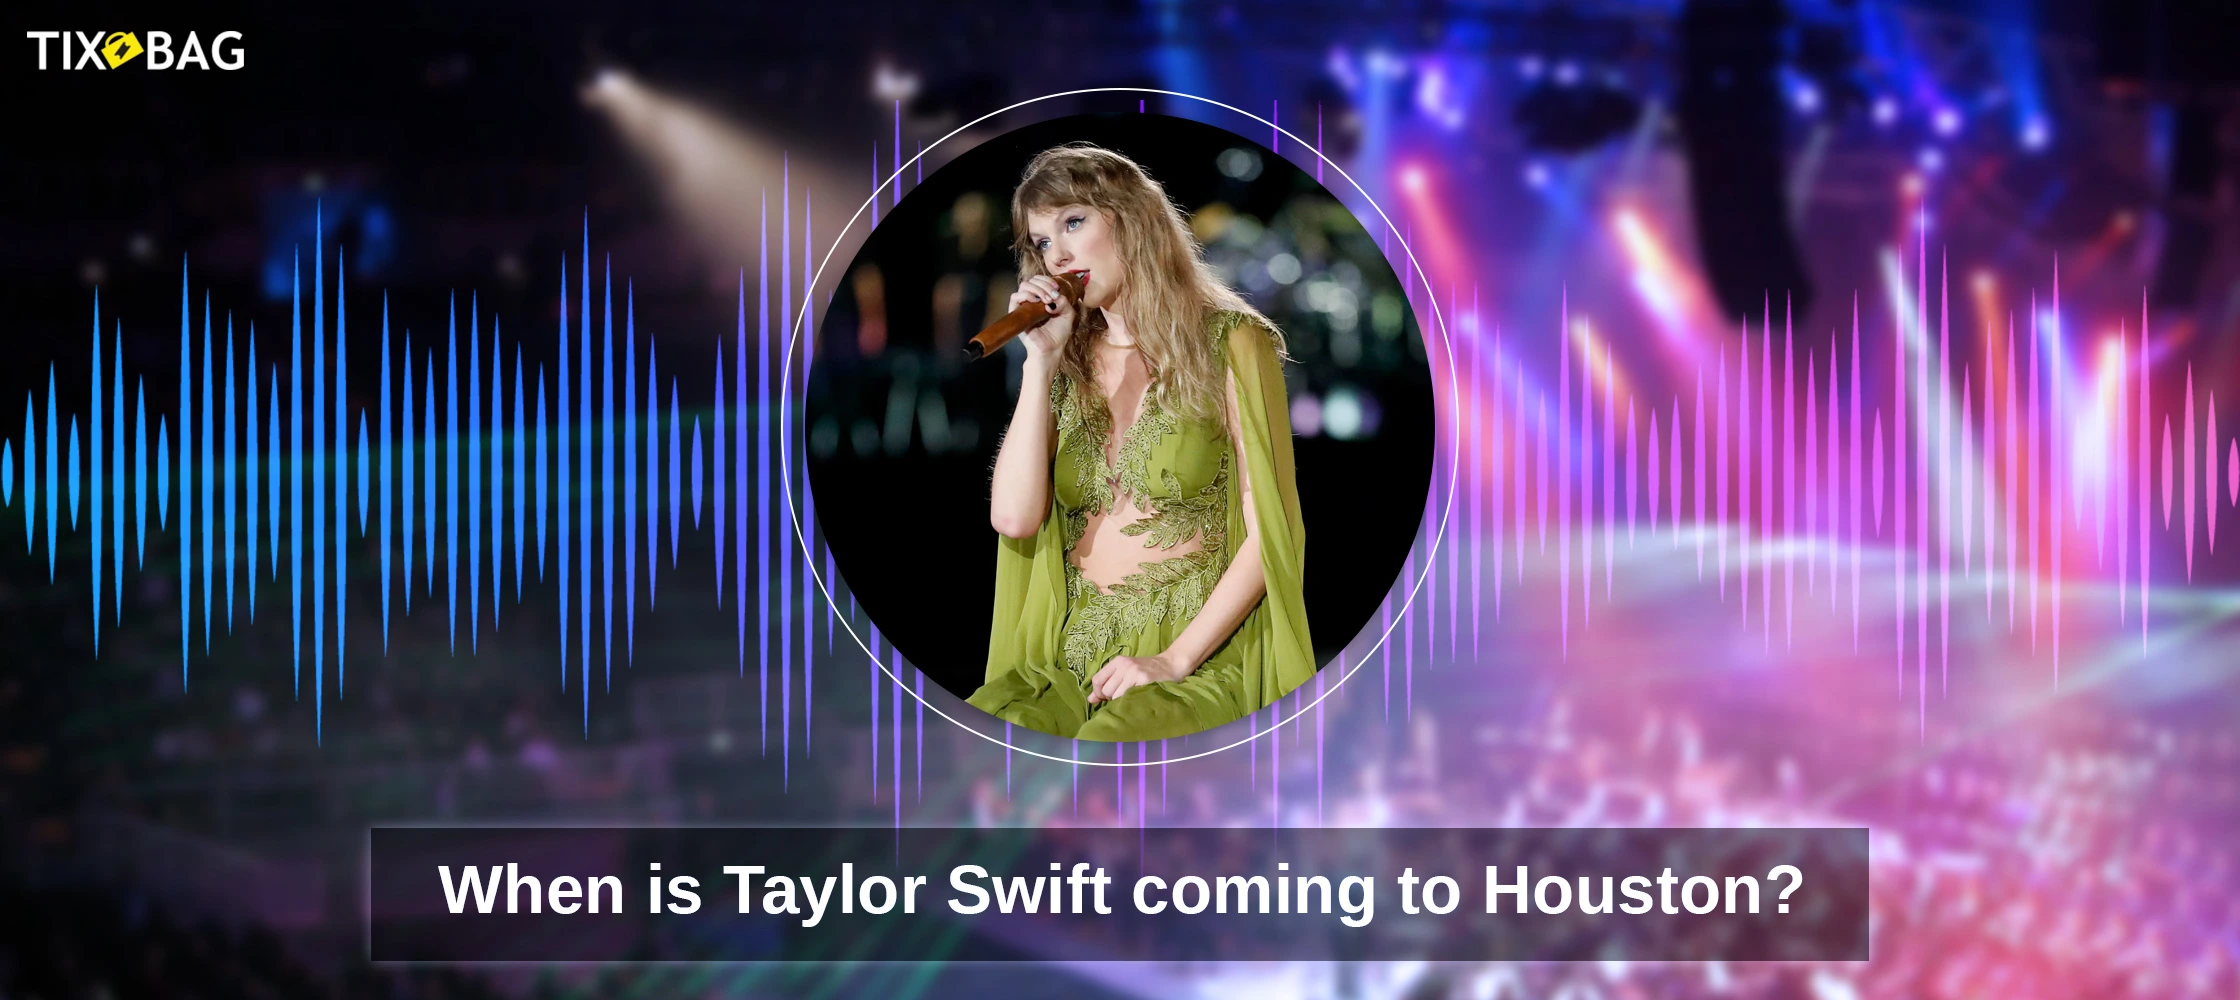 When is Taylor Swift coming to Houston?